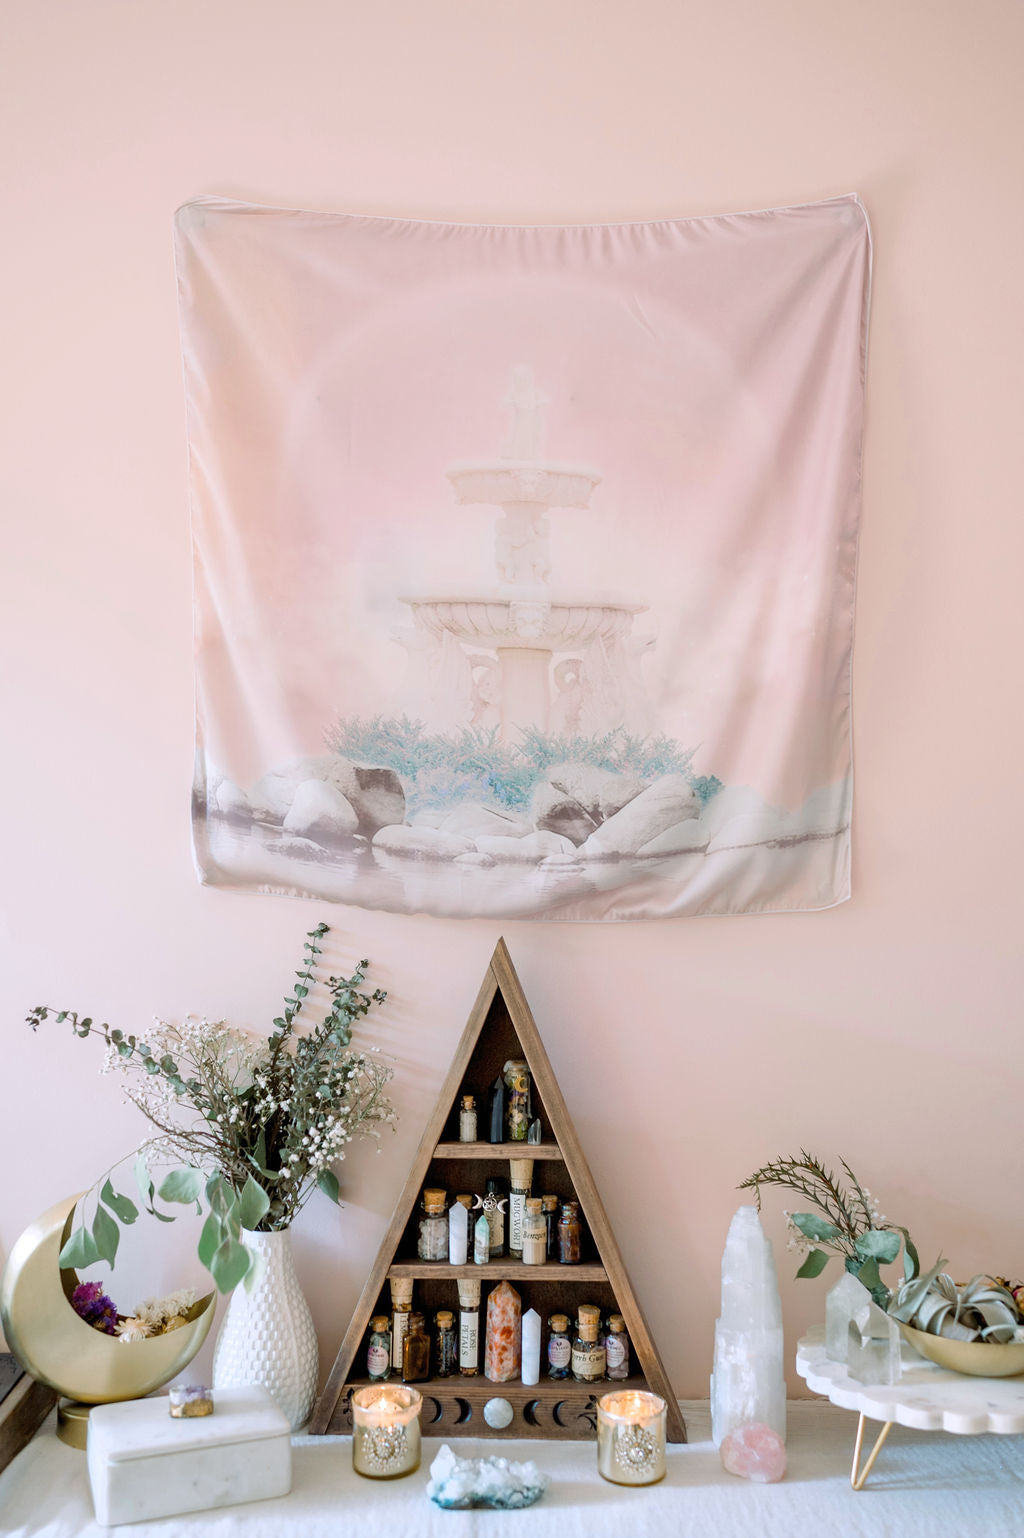 Fountain of Wealth  This sacred altar cloth carries the energy of endless abundance. Use it to create a sacred space to welcome a steady stream of prosperity and nourish a deep sense of wealth in your soul.